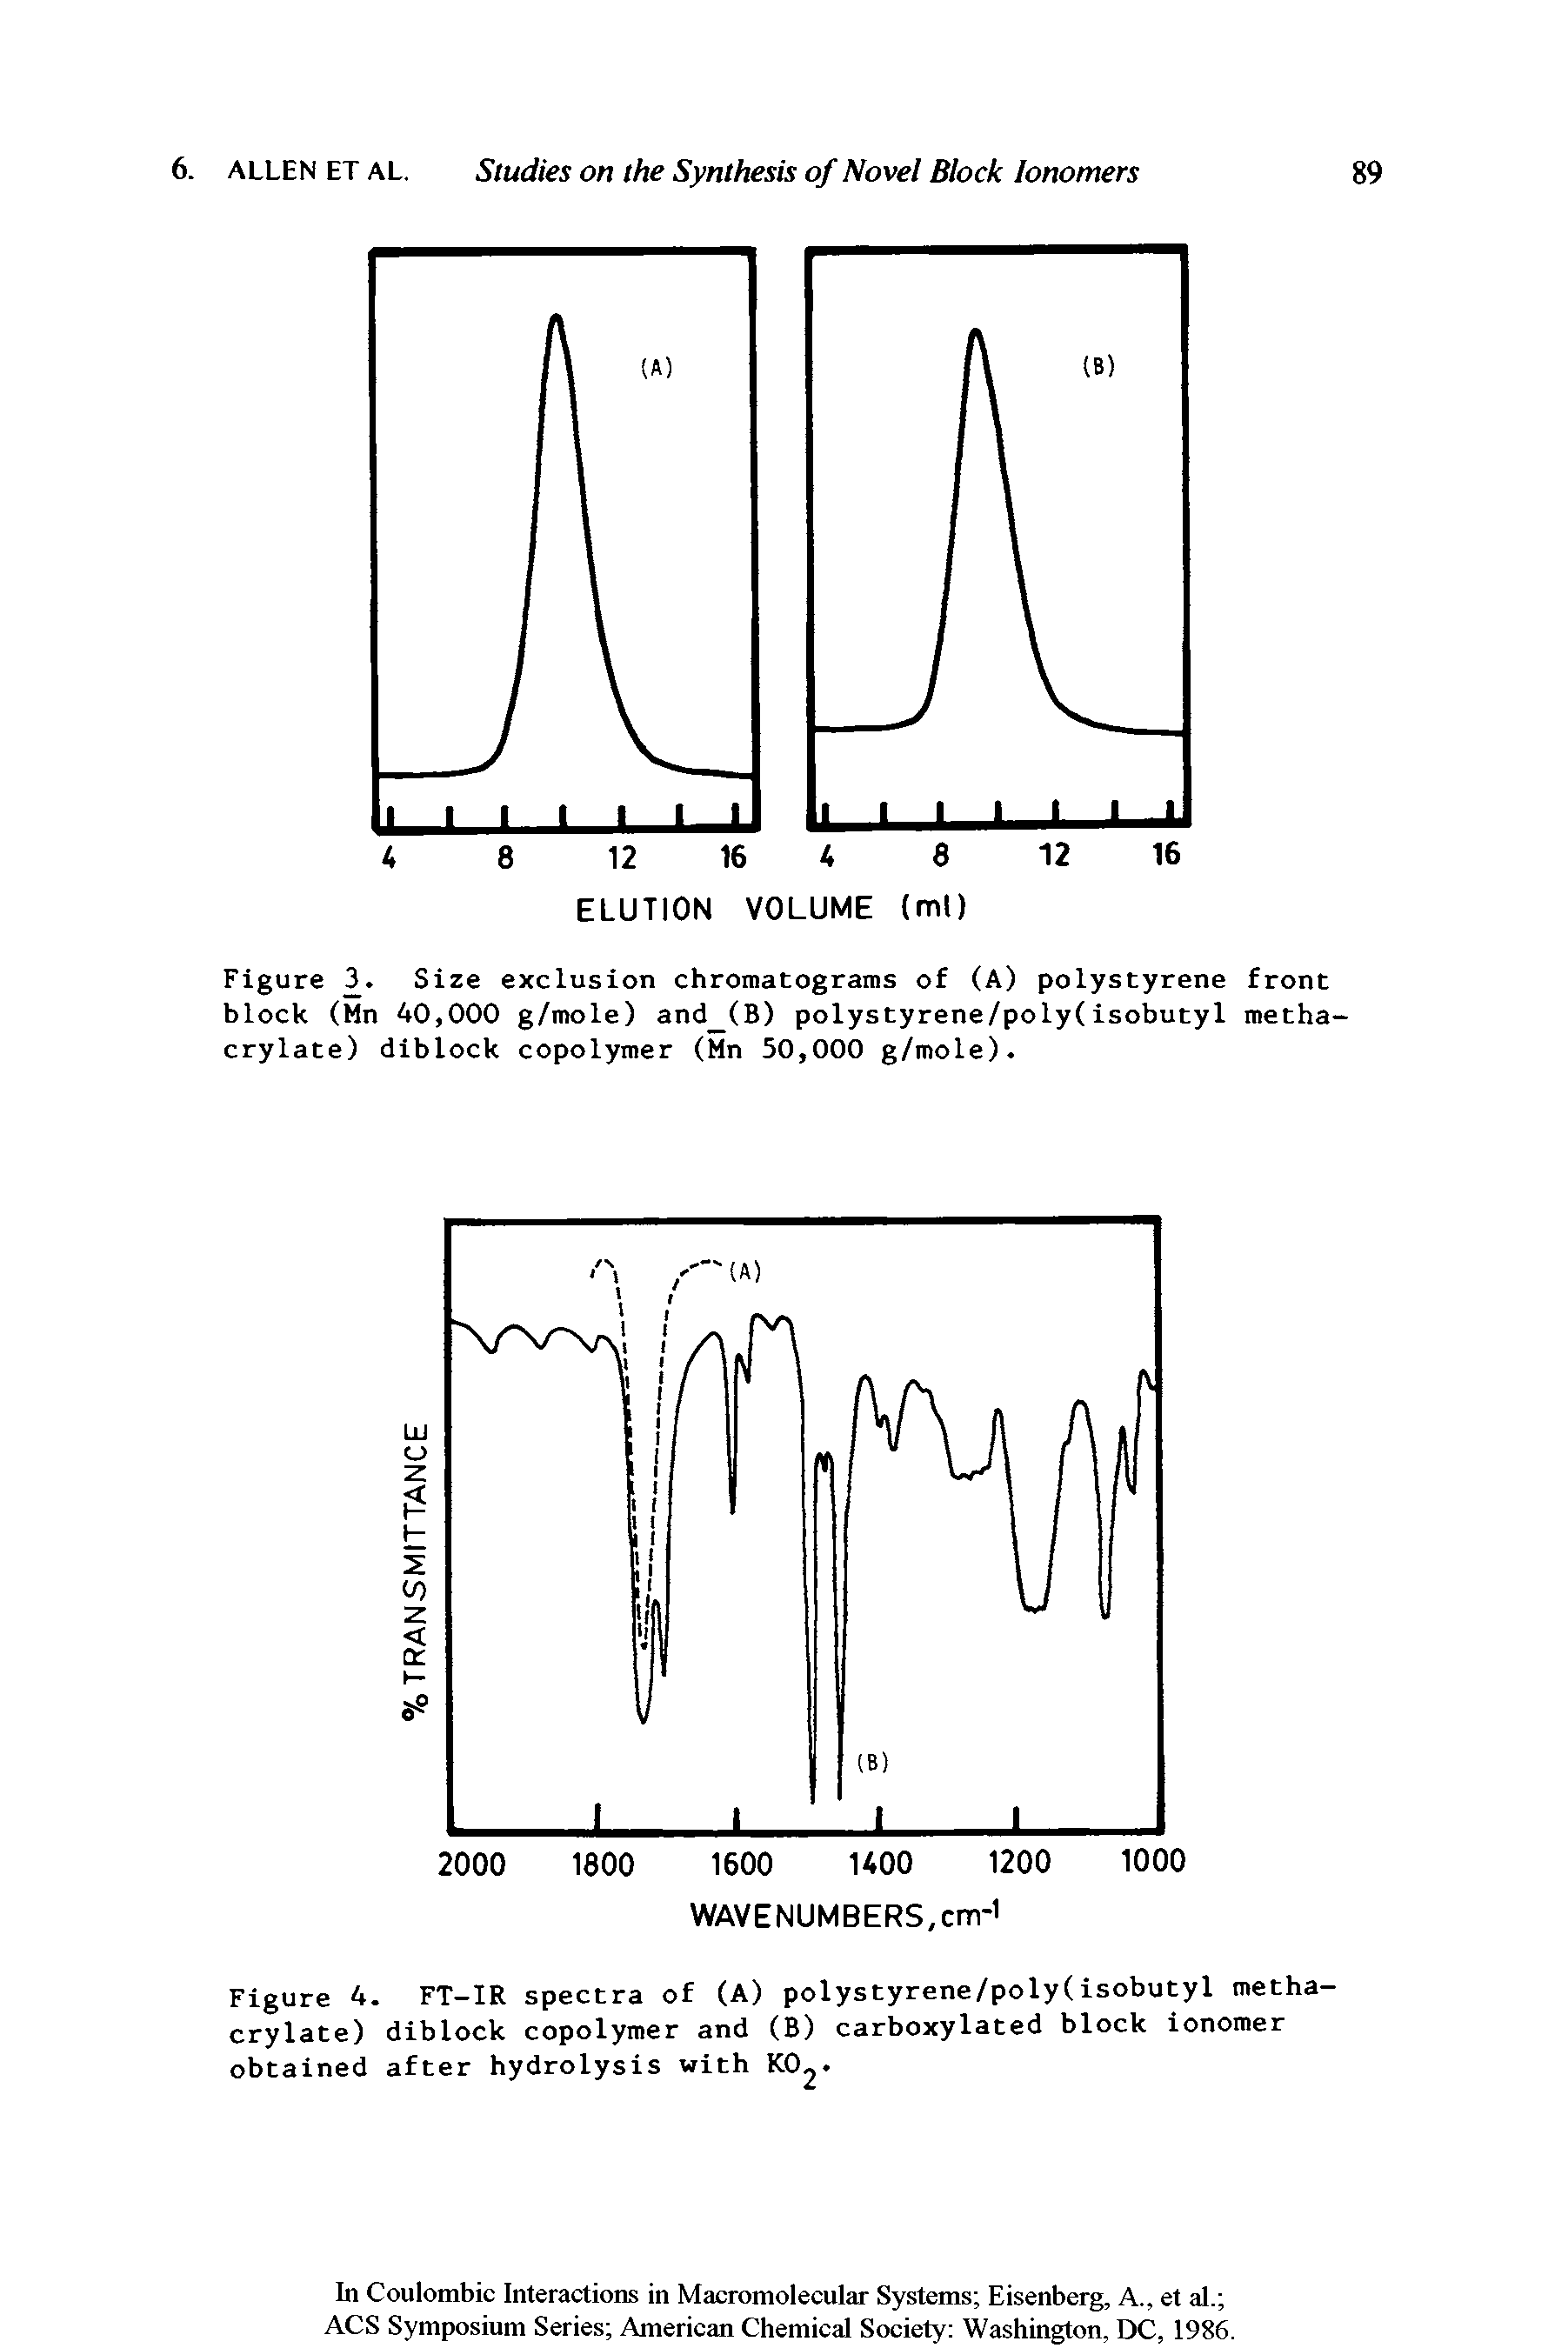 Figure 4. FT-IR spectra of (A) polystyrene/poly(isobutyl methacrylate) diblock copolymer and (B) carboxylated block ionomer obtained after hydrolysis with K0-.